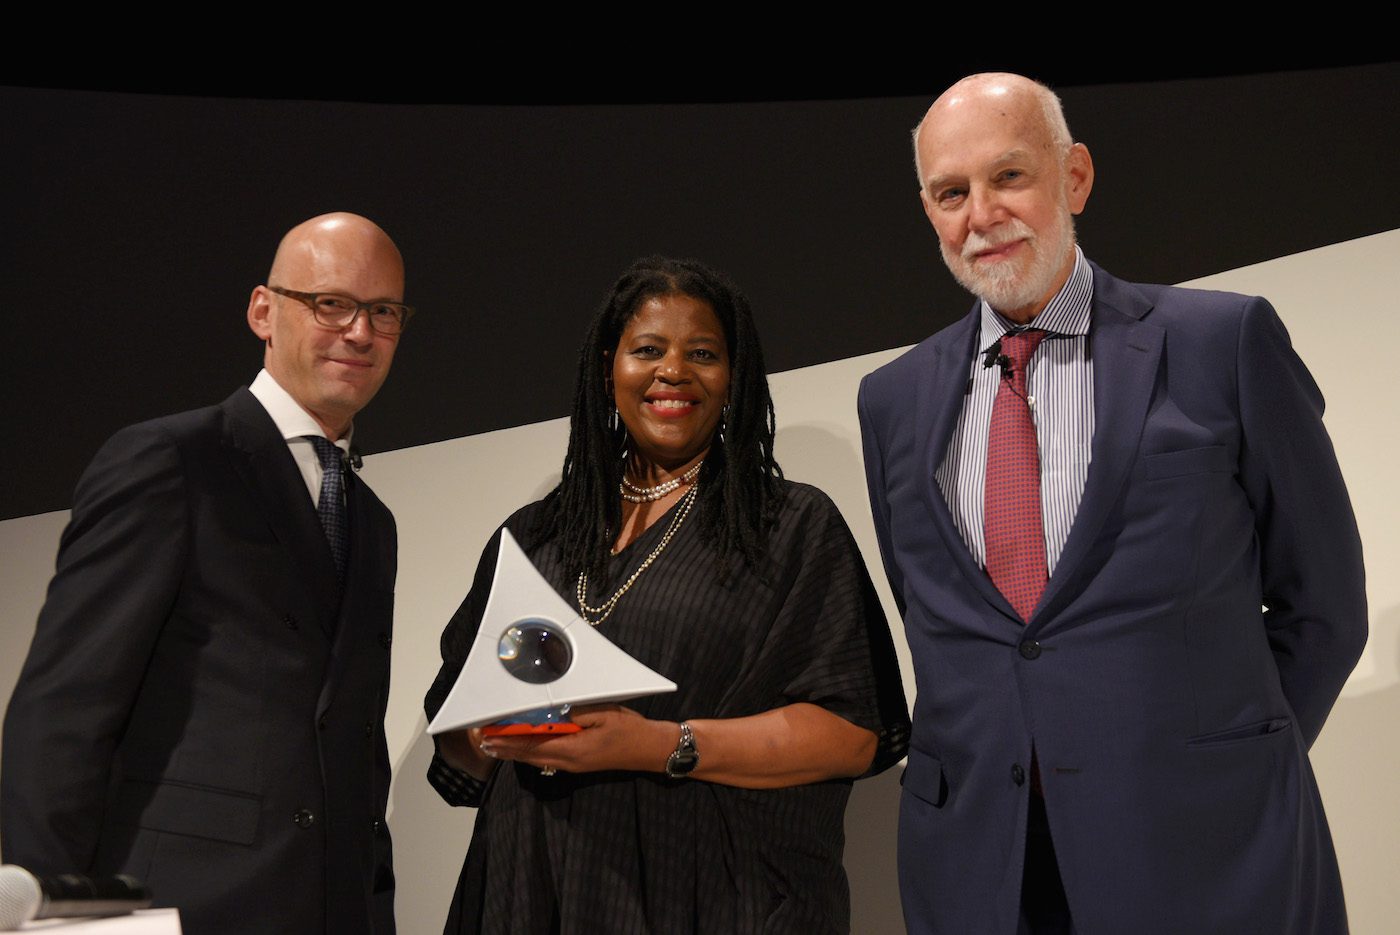 Mark Langer, CEO, HUGO BOSS; Simone Leigh, Hugo Boss Prize 2018 Winner; and Richard Armstrong, Director Solomon R. Guggenheim Museum and Foundation.
Hugo Boss Prize 2018 Artists Dinner at the Guggenheim Museum.
Photo: Andrew Toth/Getty Images.